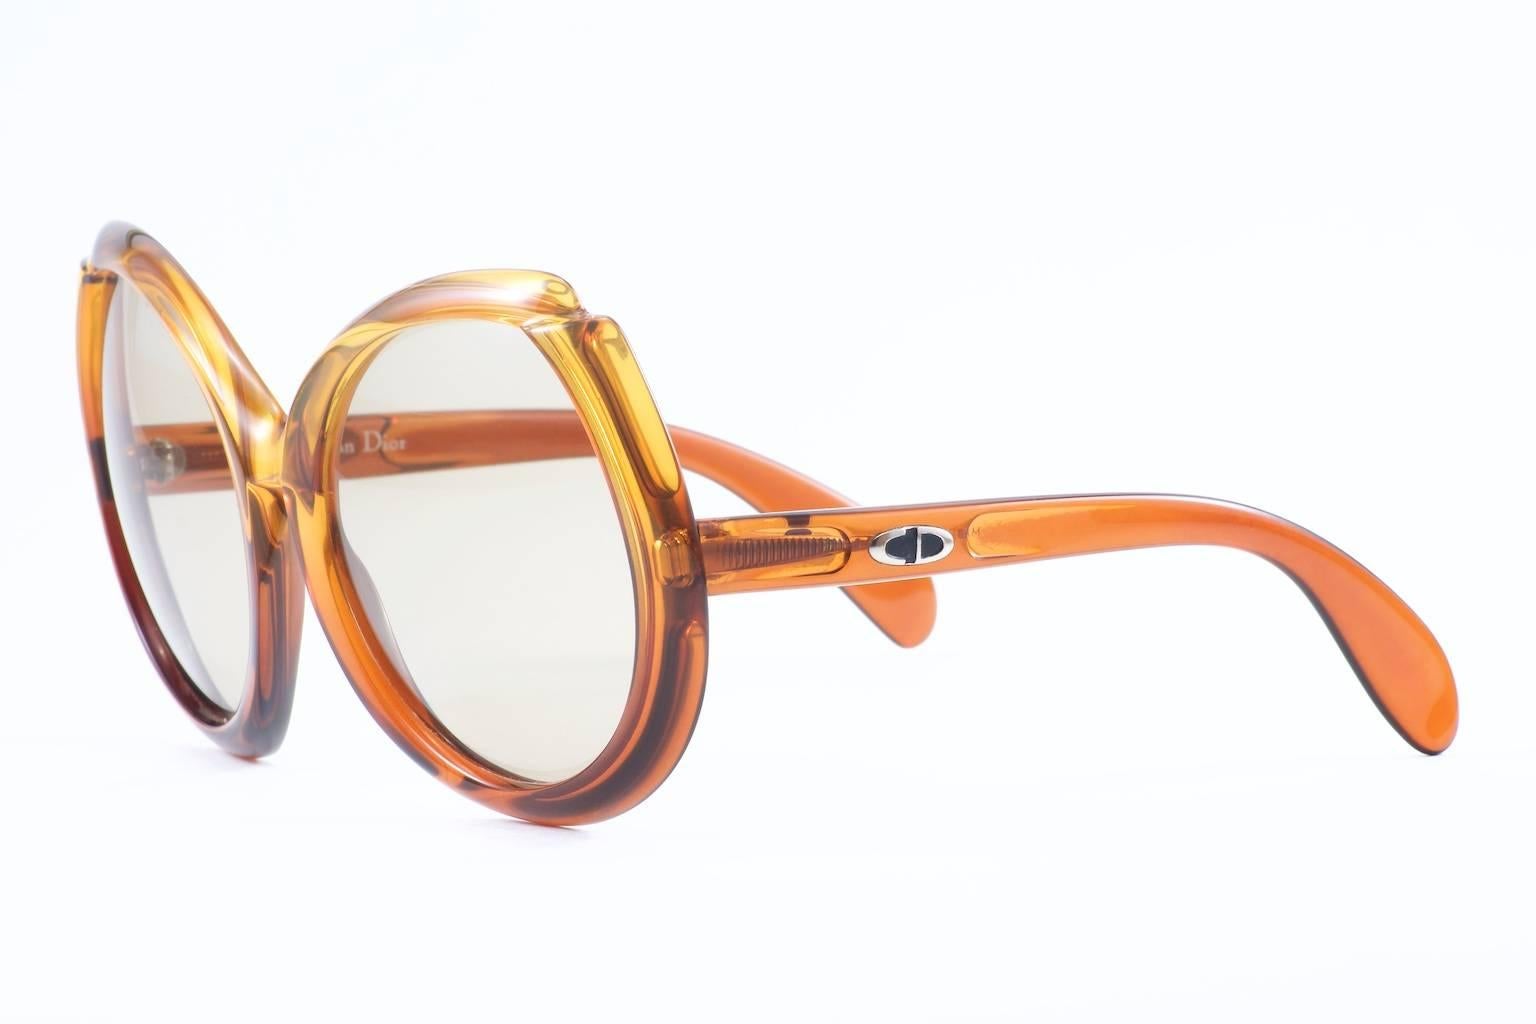 Vintage Christian Dior eyewear is known for their enhanced taste in fashion. Reestablishing the realm of the fashion industry, Dior frames are known to always make a statement with sizes, shapes, and textures. Vintage Christian Dior is a commodity